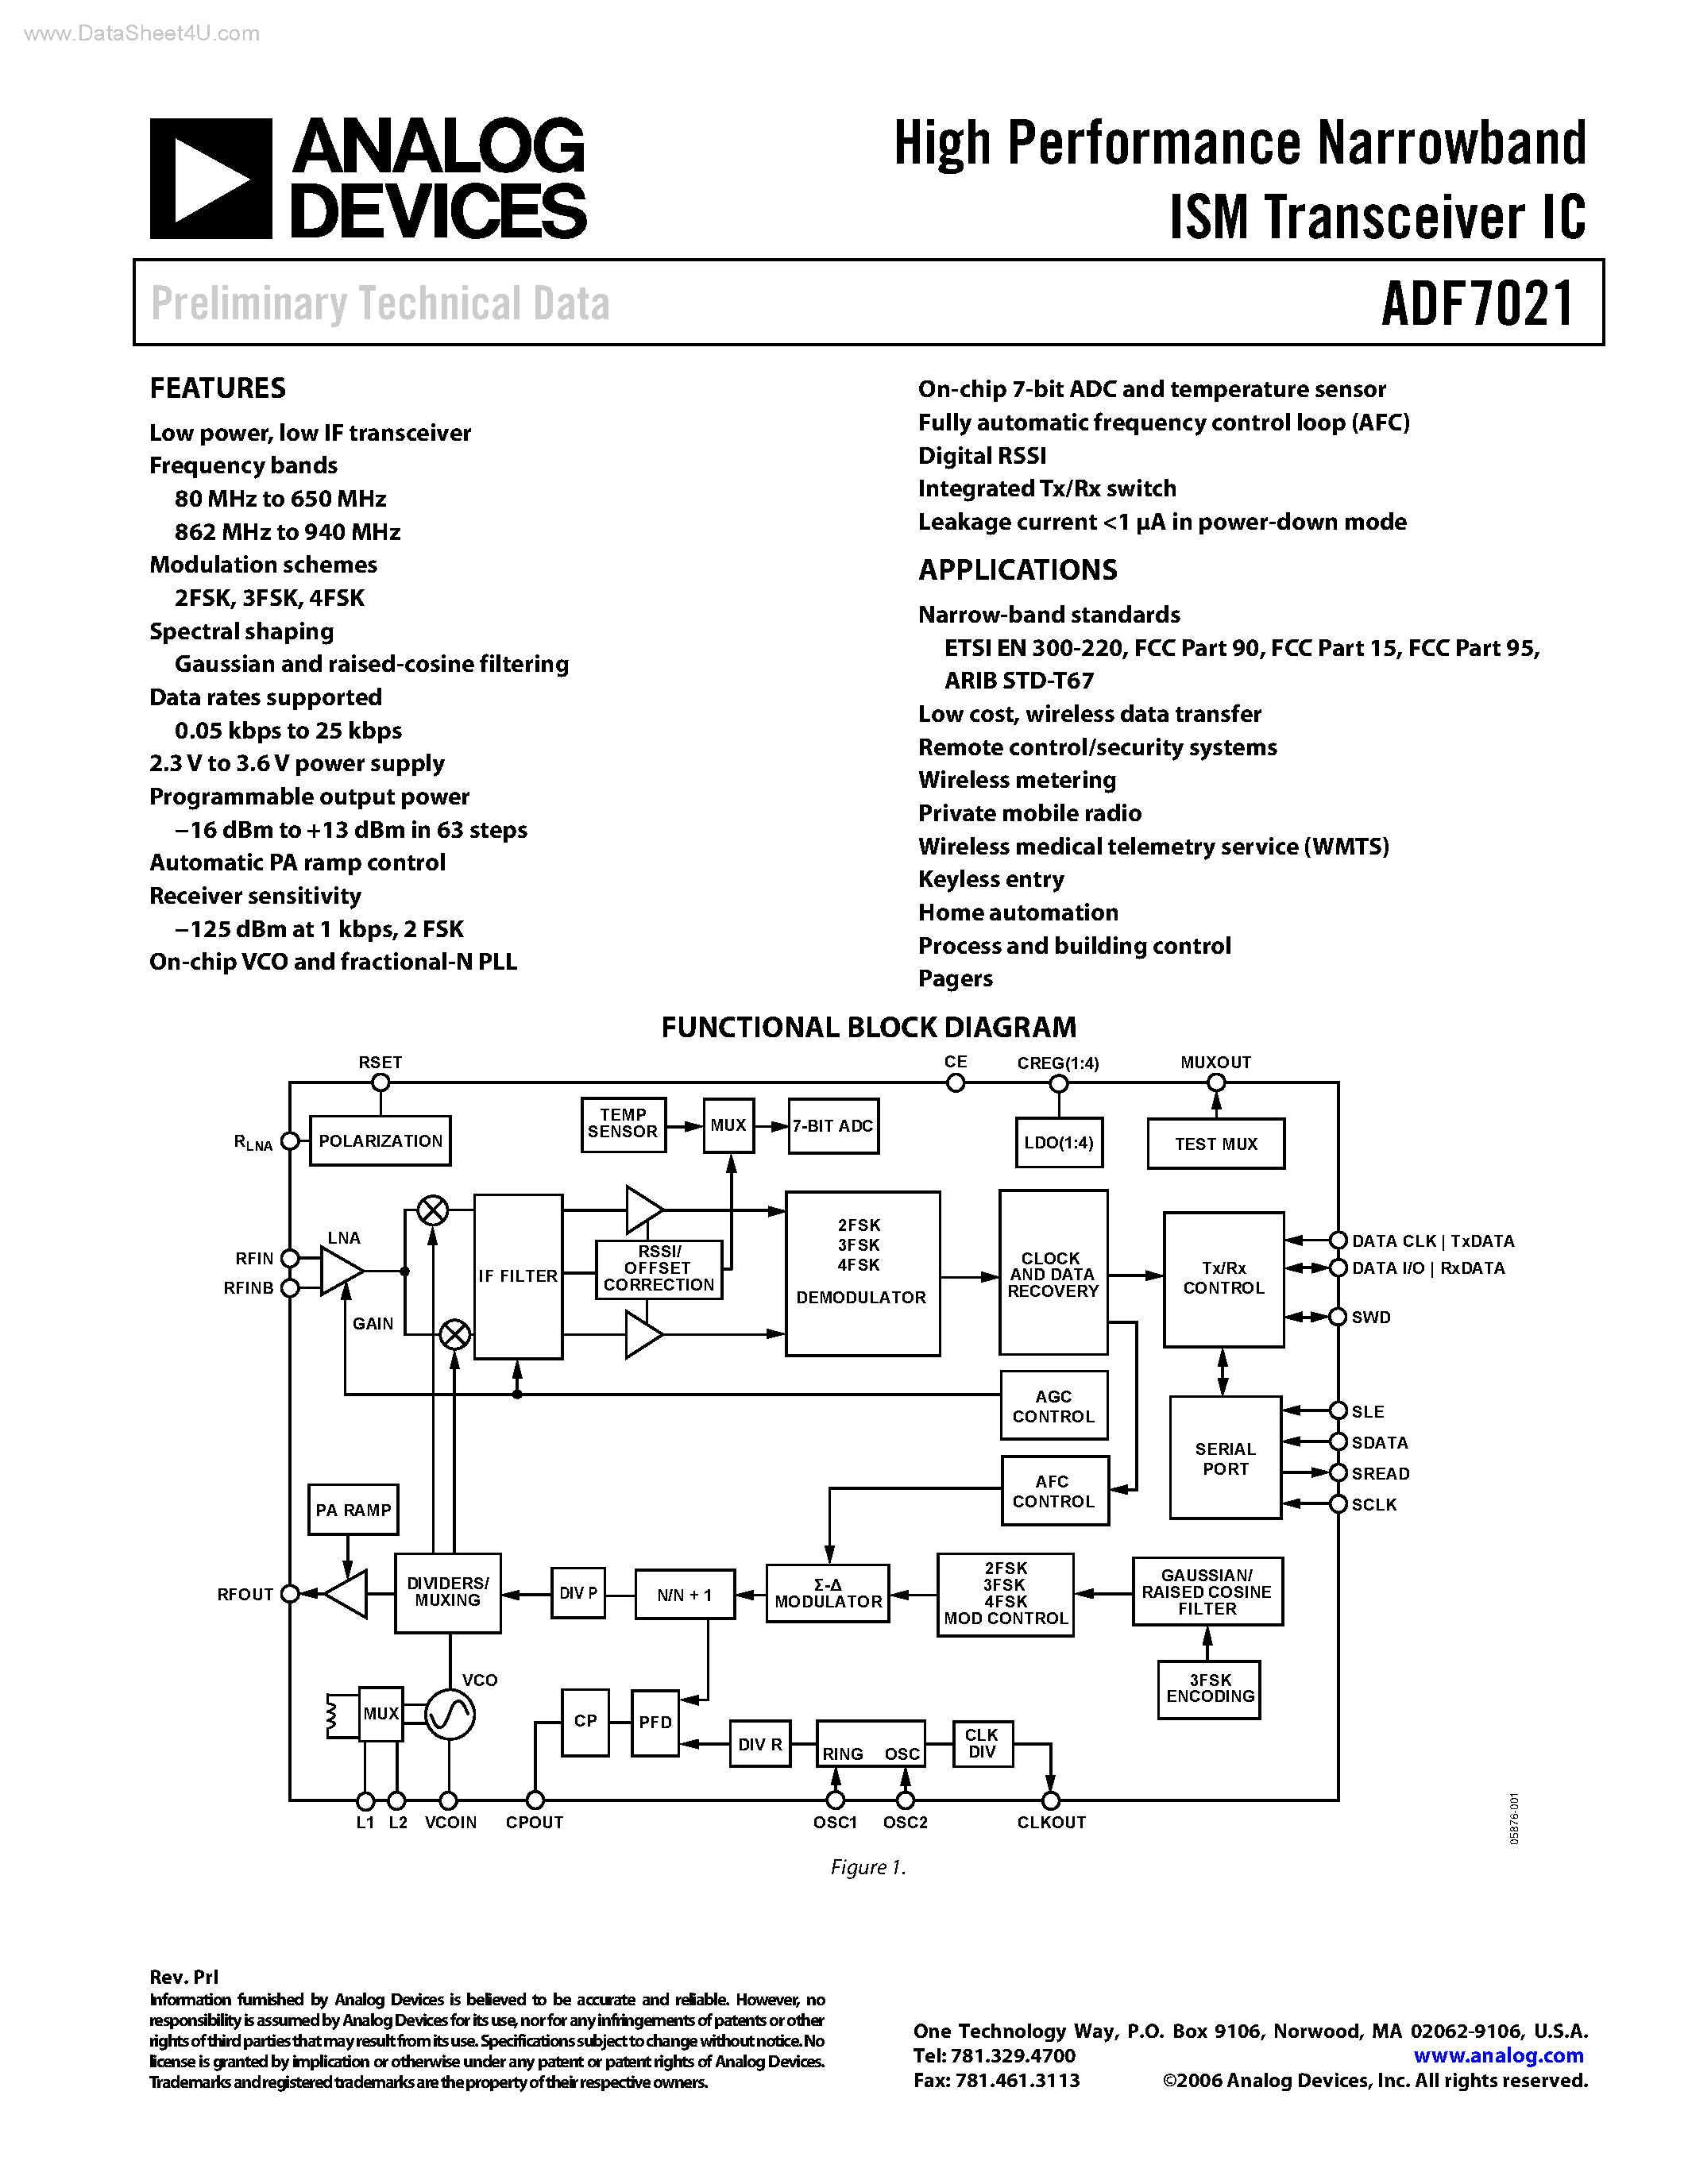 Datasheet ADF7021 - High Performance Narrowband ISM Transceiver IC page 1